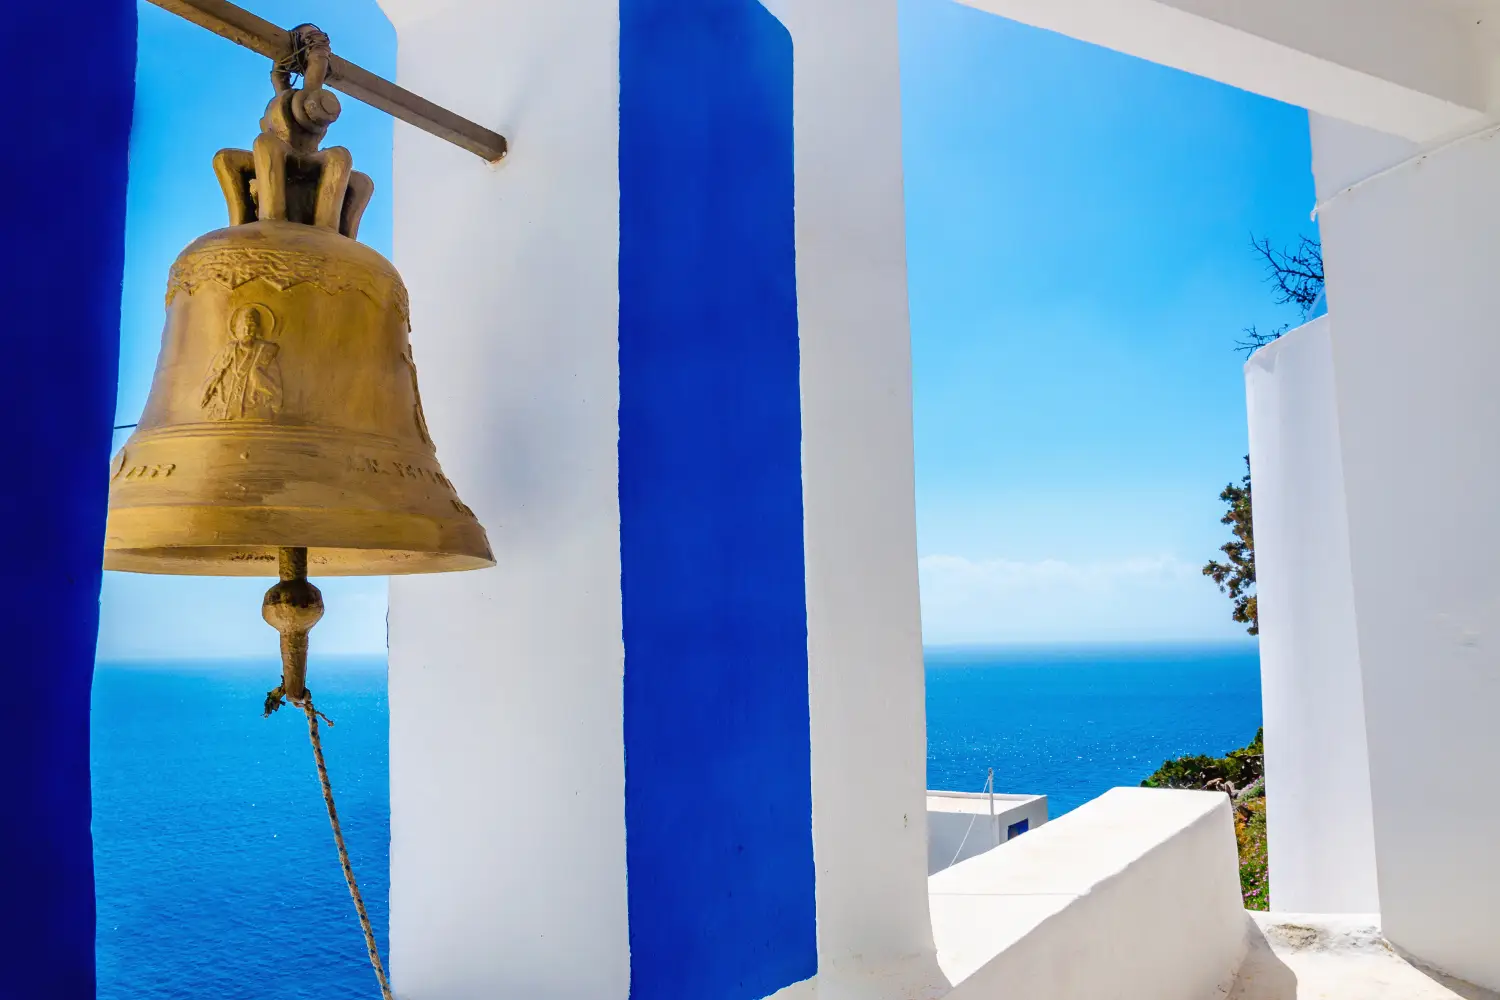 Ferrry to Rhodes - Iconic view on golden bell and typical blue. White church on Greek Island Kalymnos, Greece.